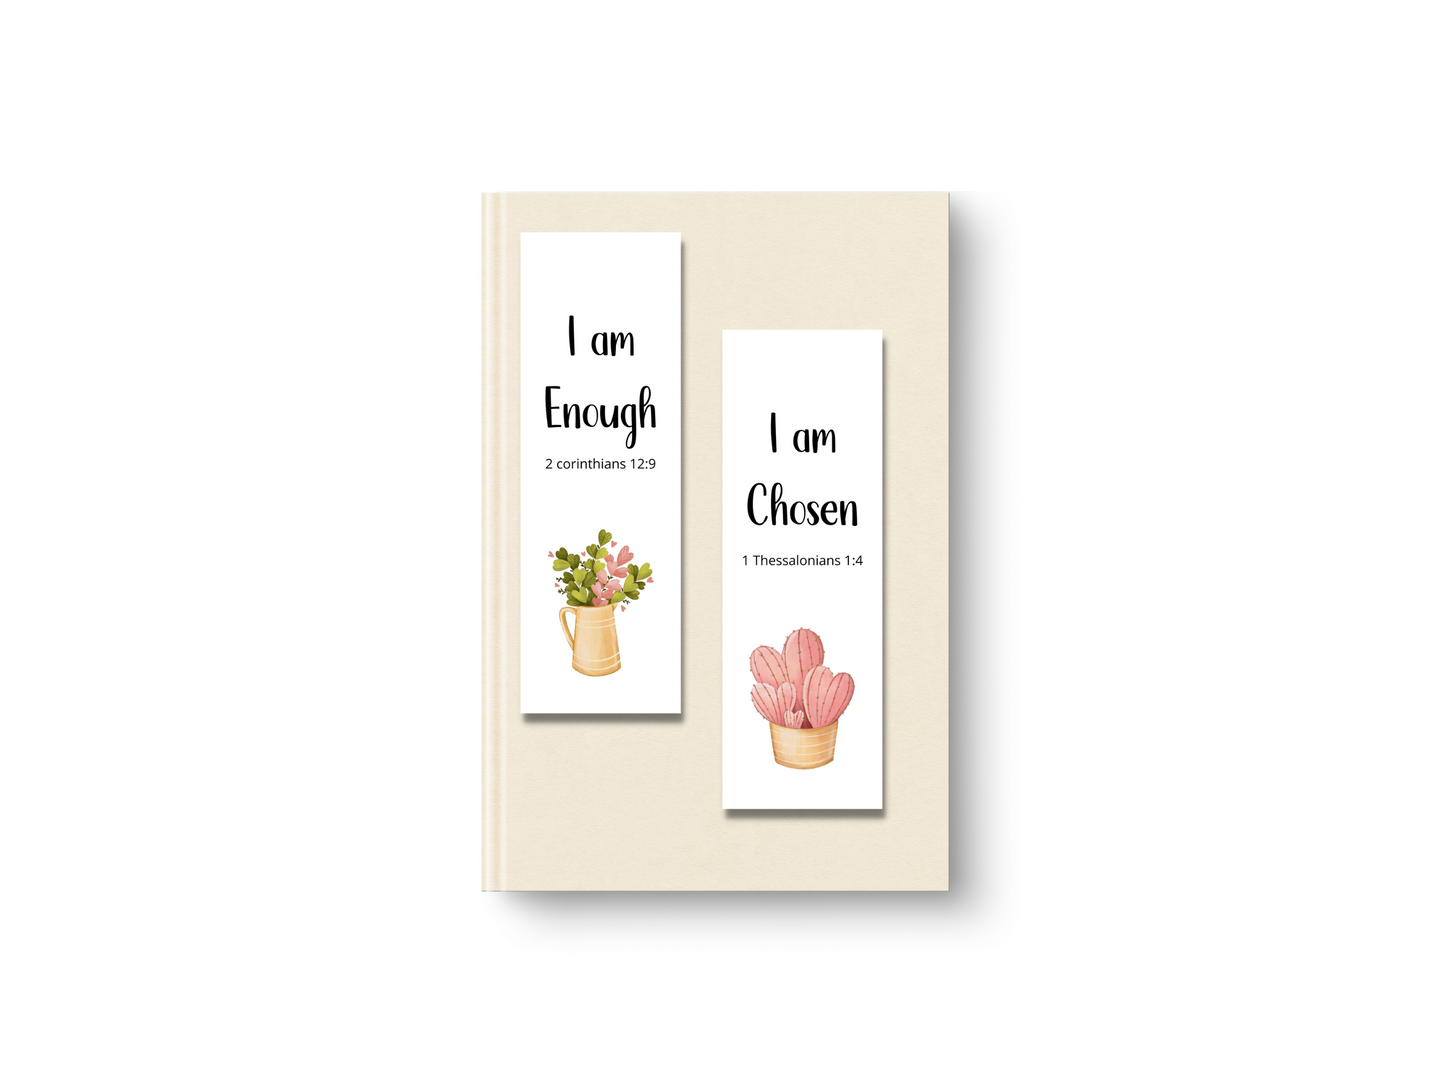 Bible Verse Bookmarks for Women